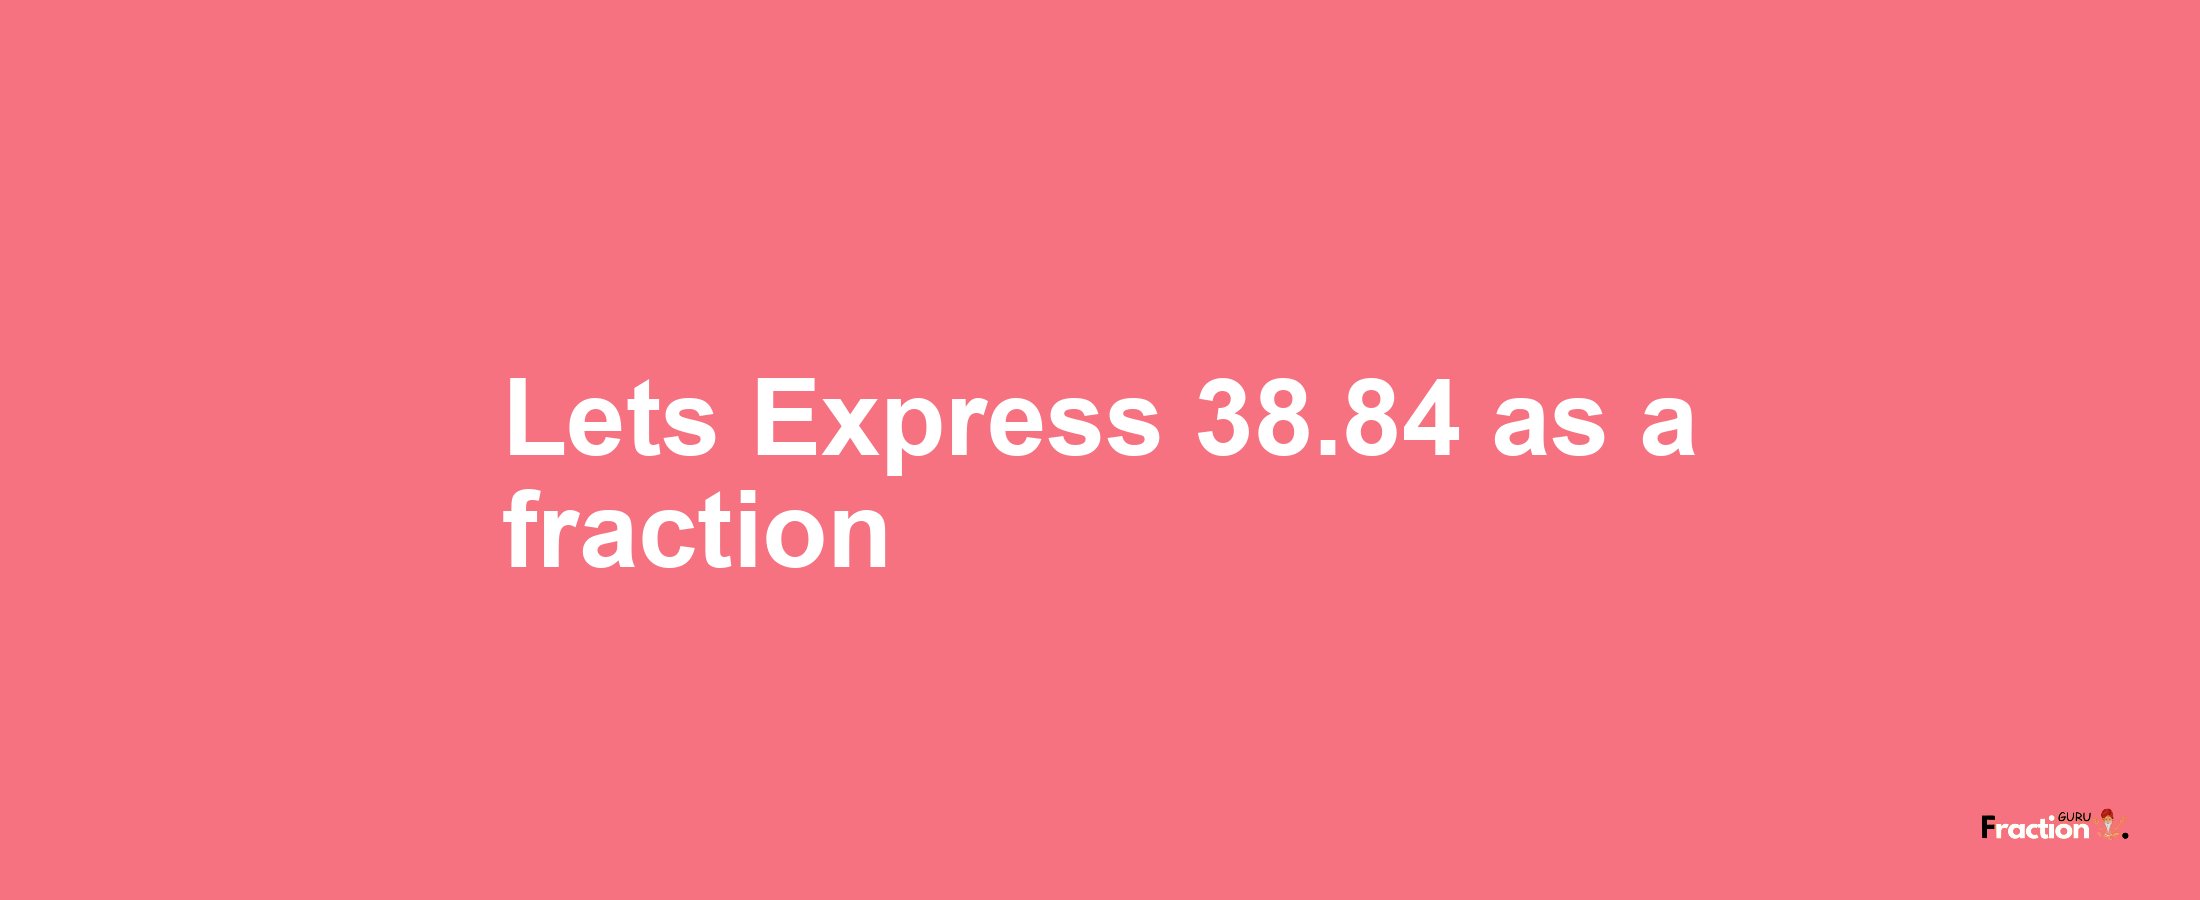 Lets Express 38.84 as afraction